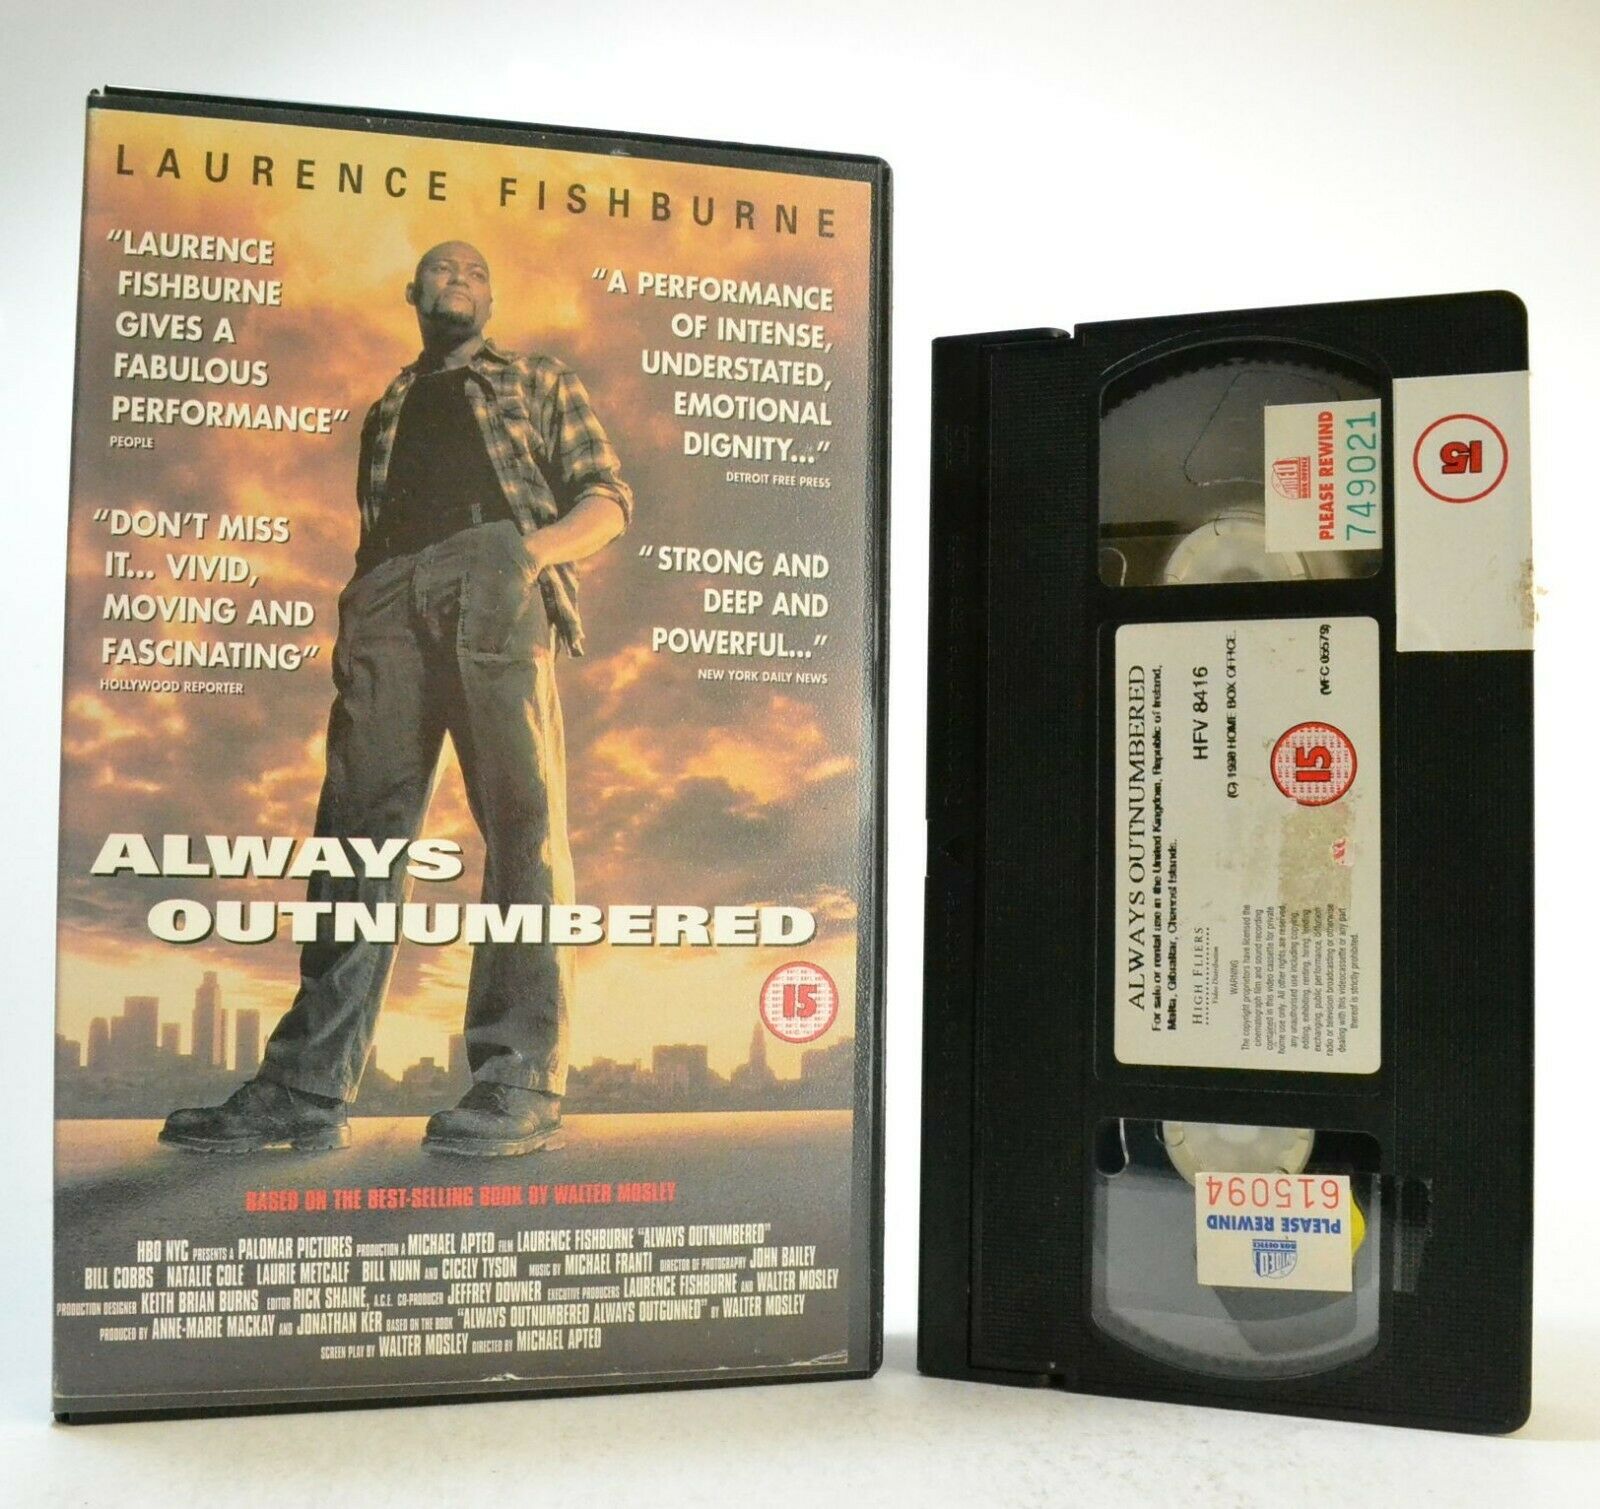 Always Outnumbered: Based On W.Mosley Book - Drama - Large Box - Ex-Rental - VHS-